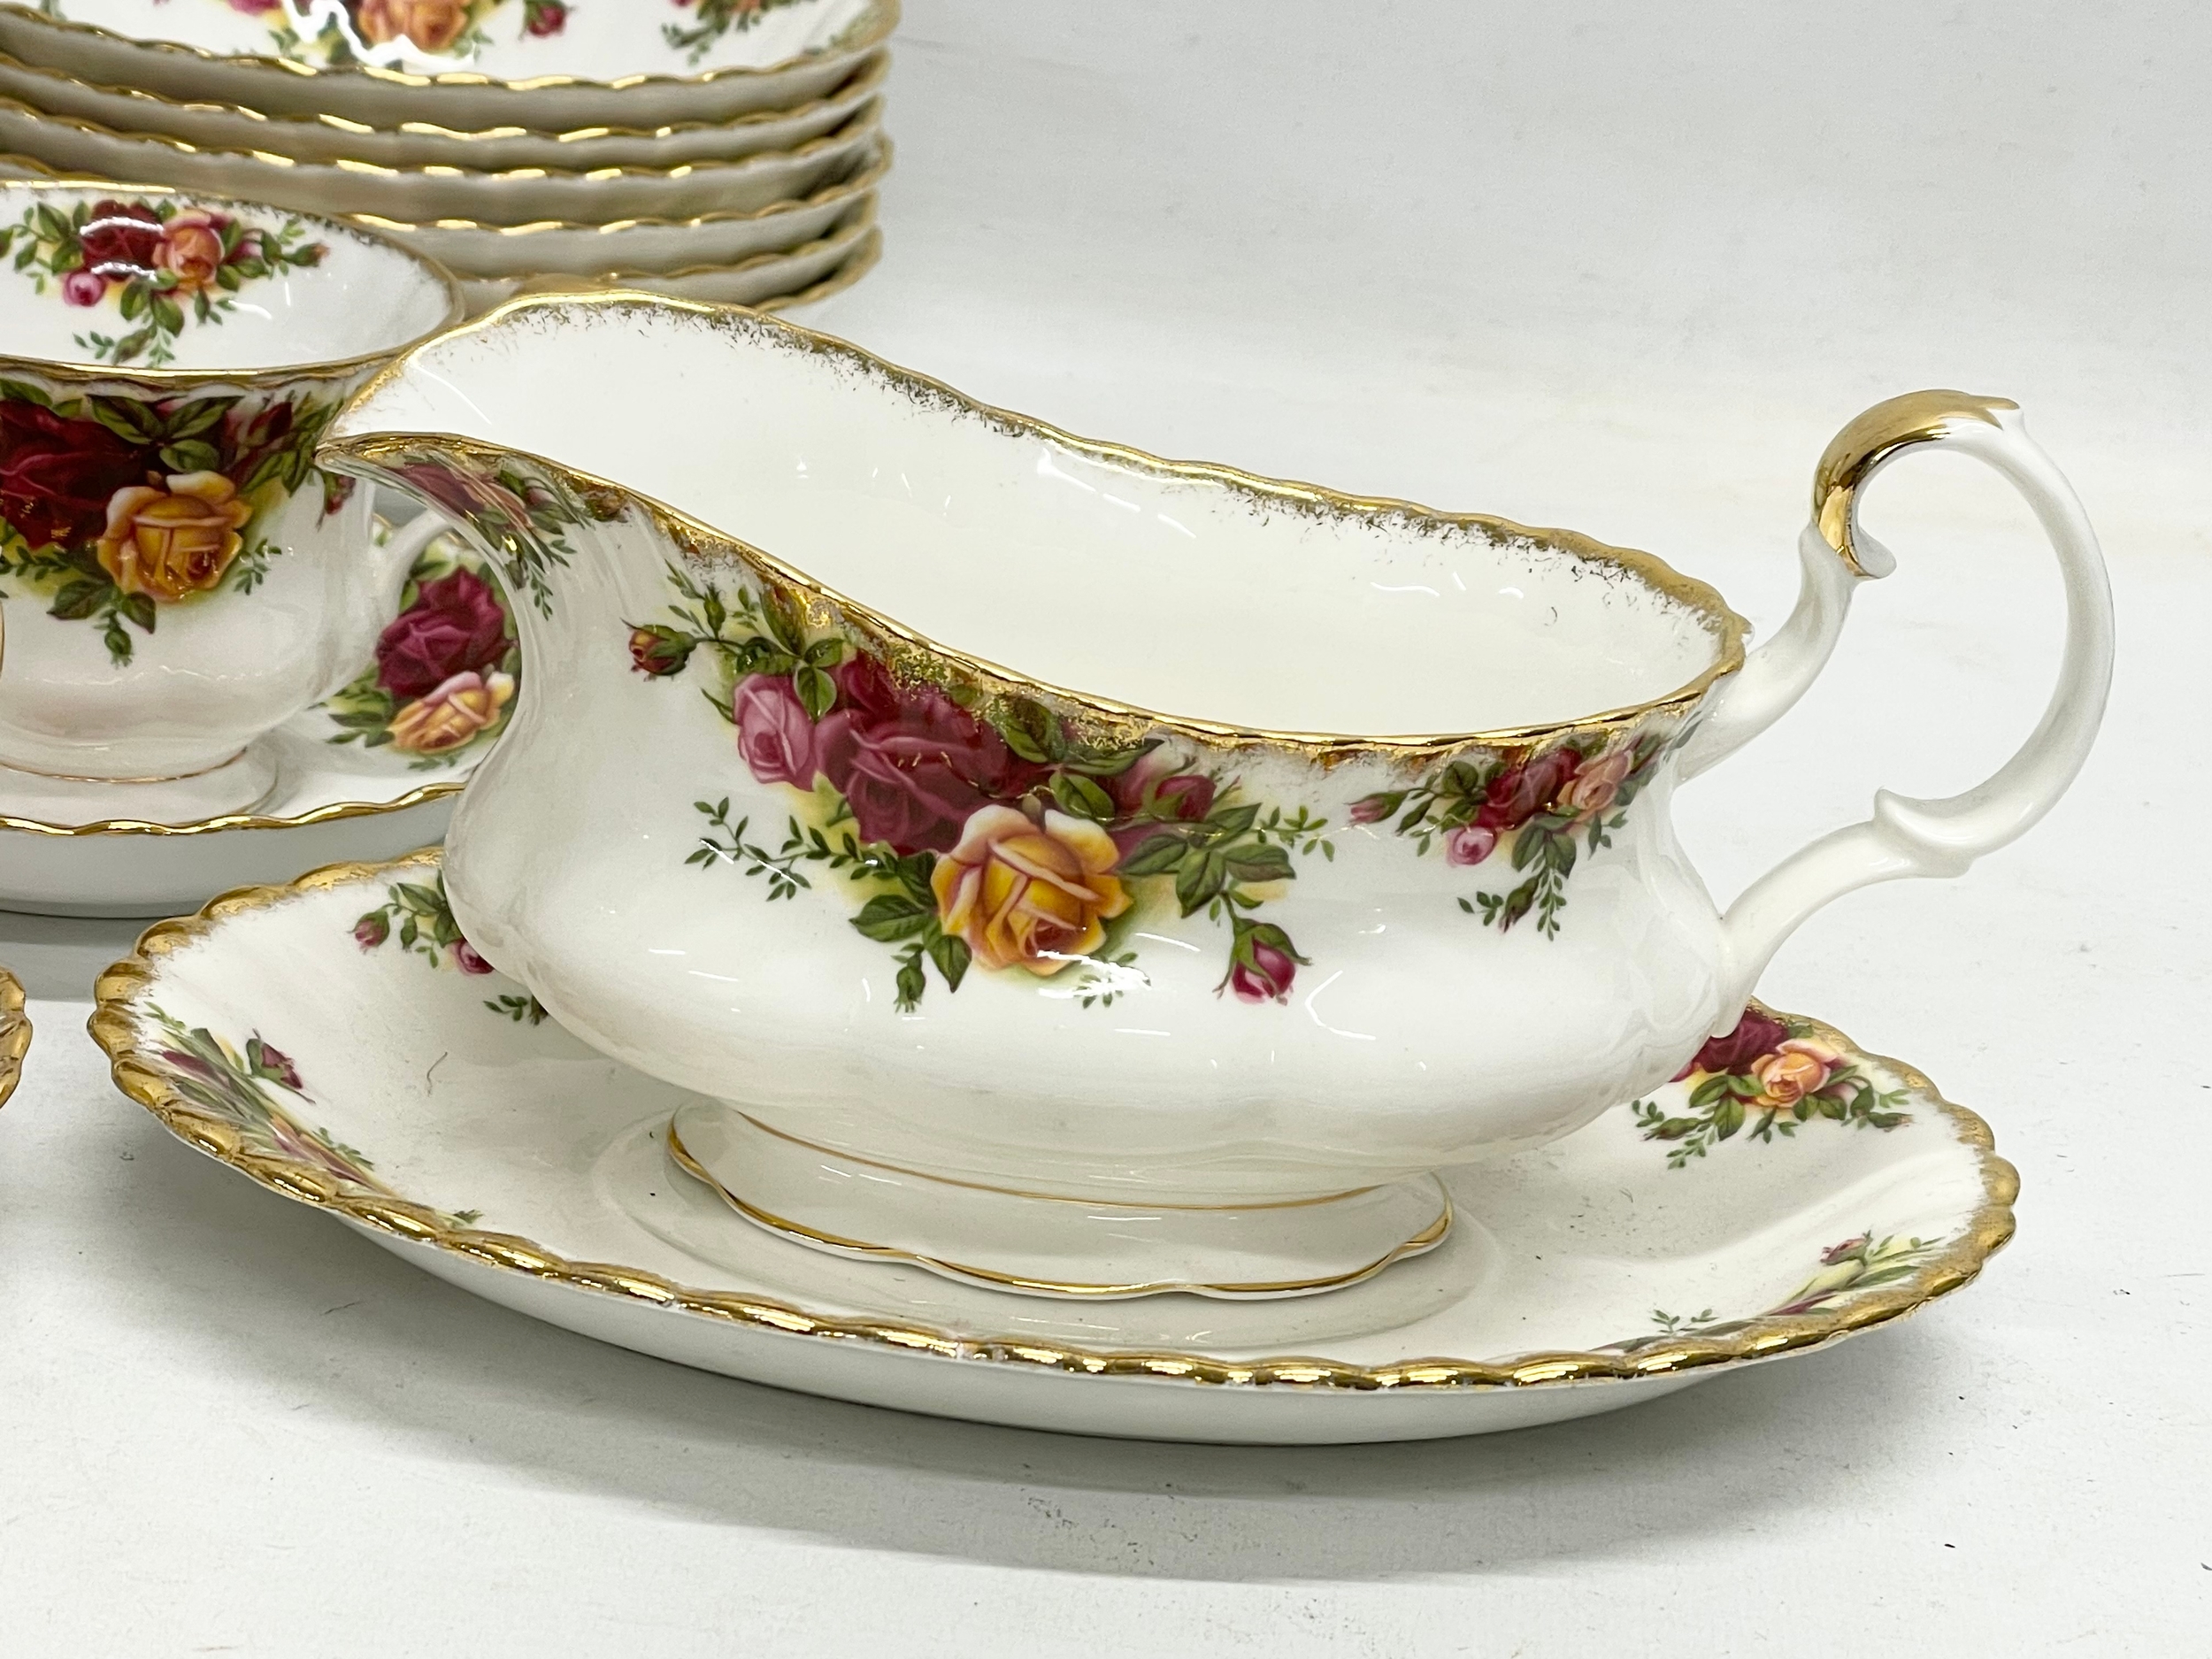 33 pieces of Royal Albert ‘Old Country Roses’ cake plate, 6 soup bowls, gravy boat and saucer. - Image 2 of 6